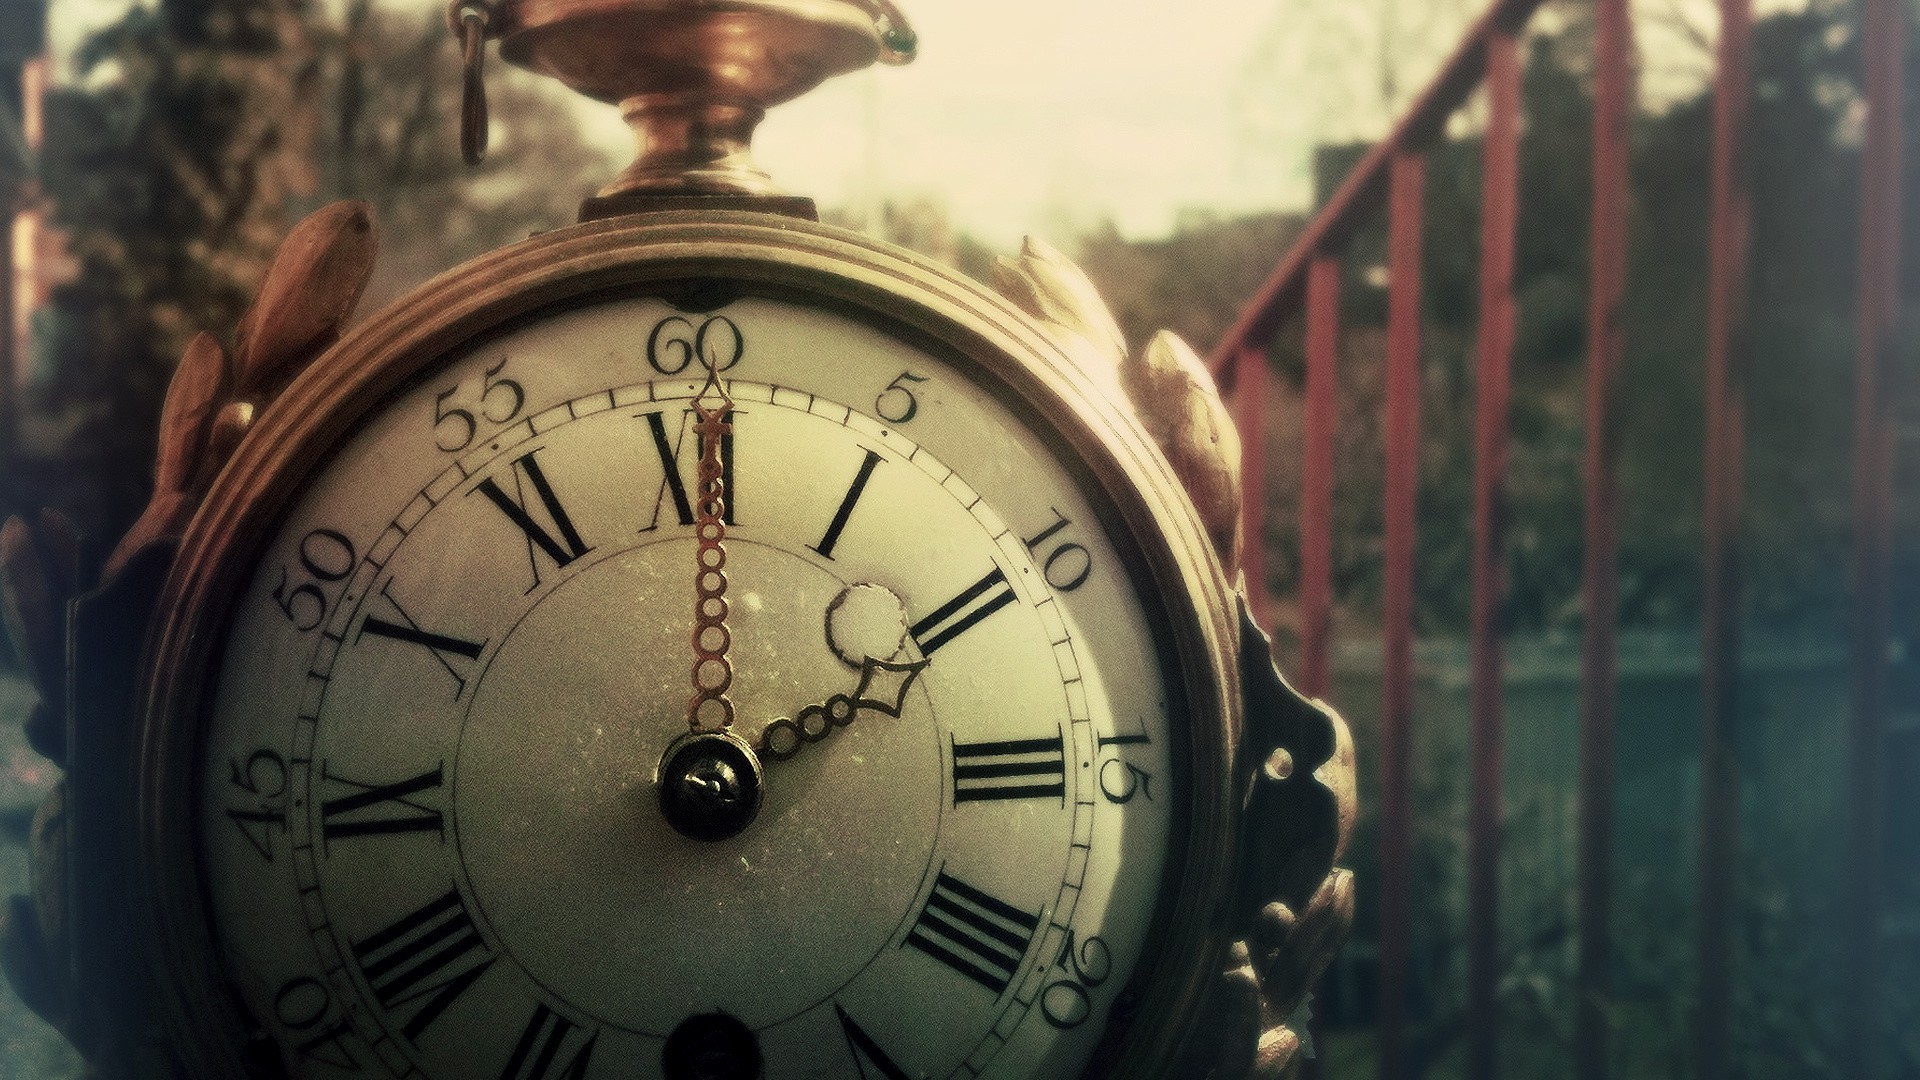 Clock Full HD Wallpaper and Background Image | 1920x1080 ...